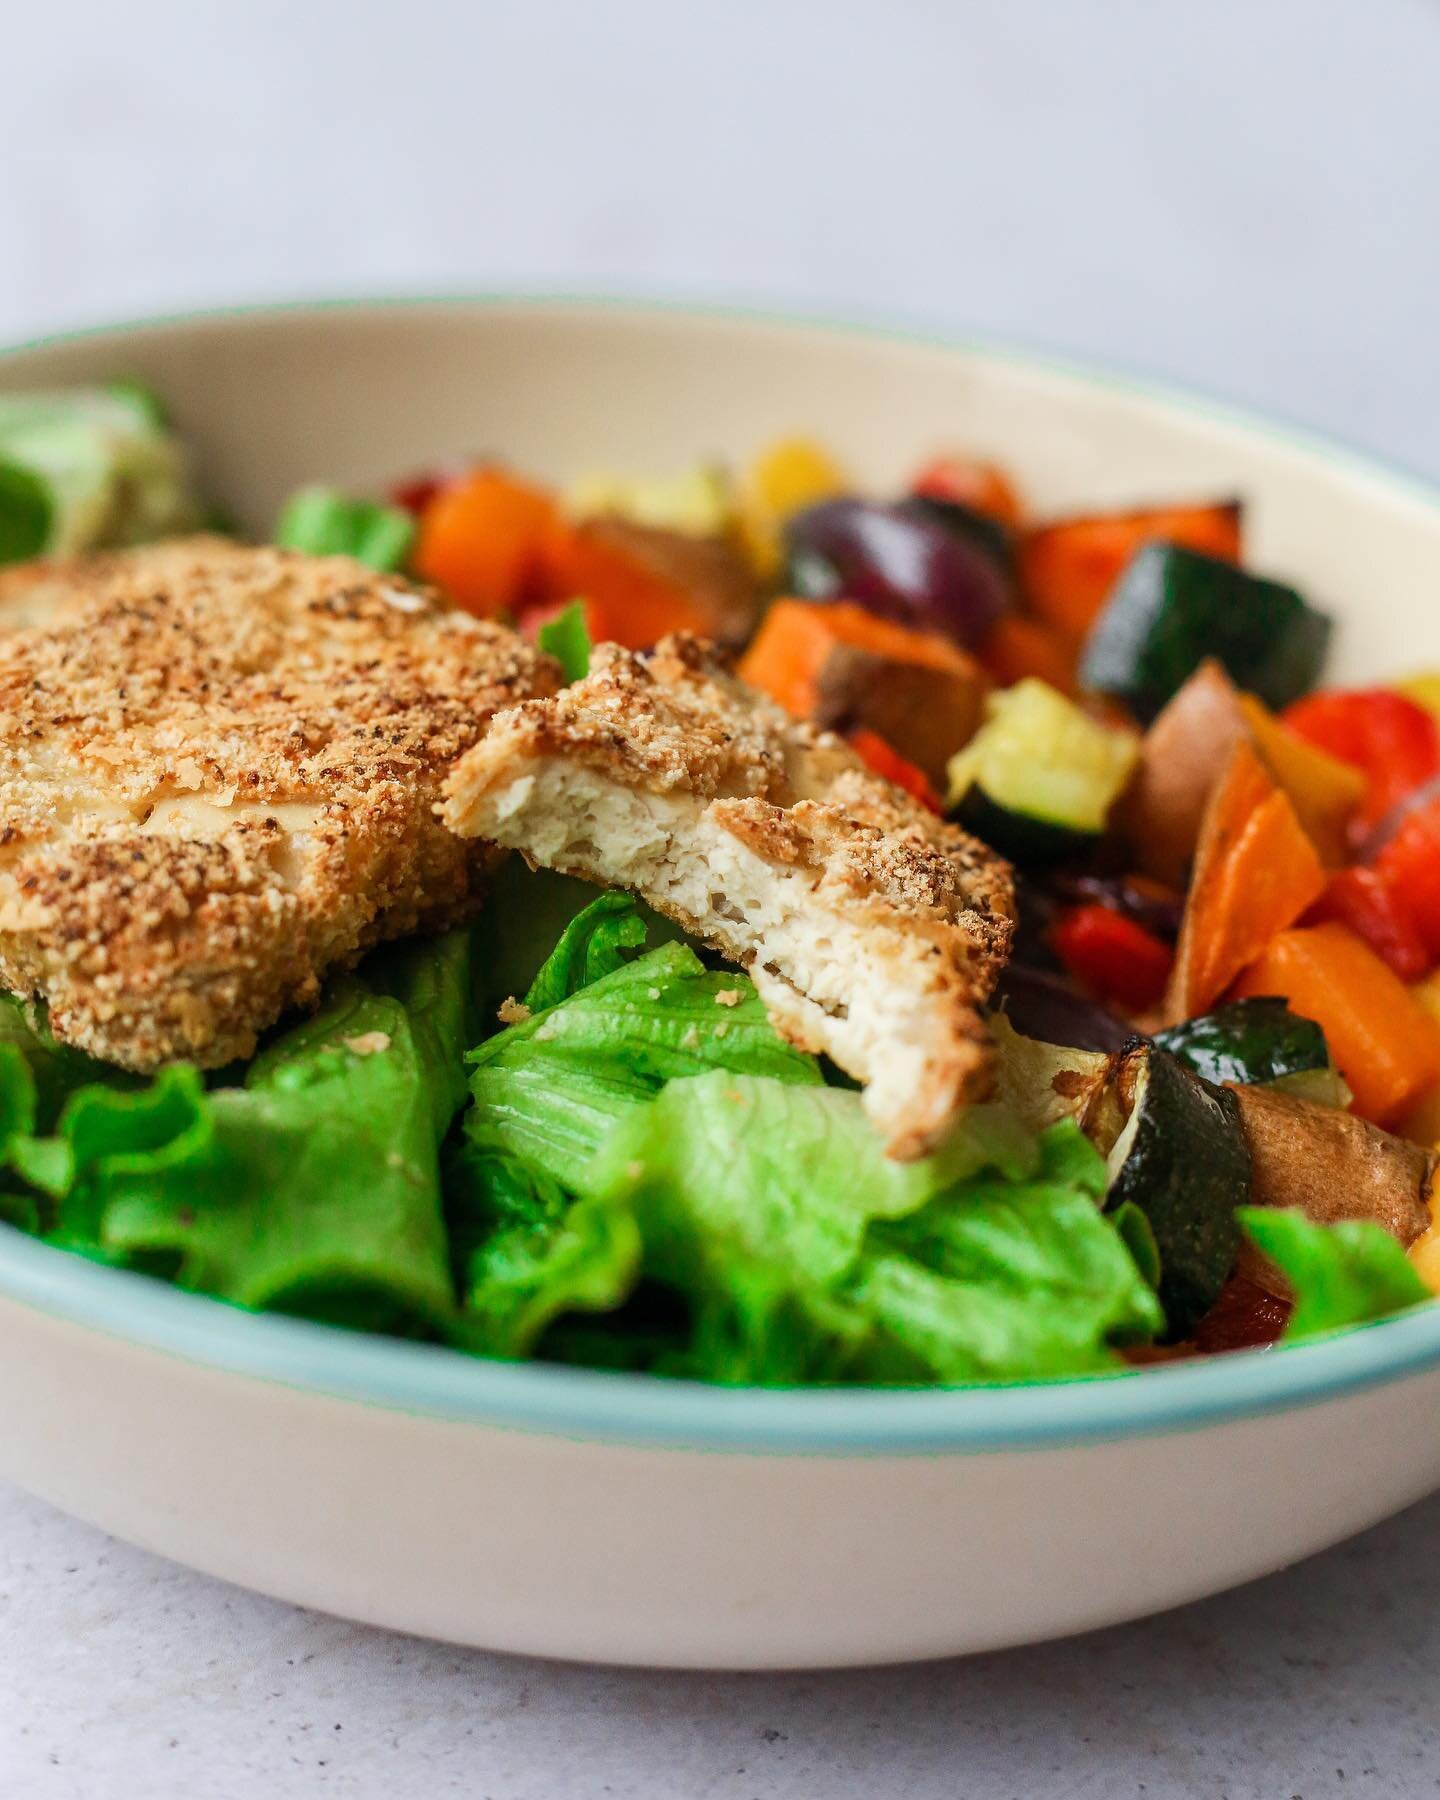 Tofu, but make it ✨ crispy ✨

Super simple recipe for a Crispy Roasted Tofu and Veg Bowl, where (you&rsquo;ve guessed it...) I&rsquo;ve roasted some veg in olive oil and eaten it with breaded tofu - the perfect way to get that crunch.

Here&rsquo;s w